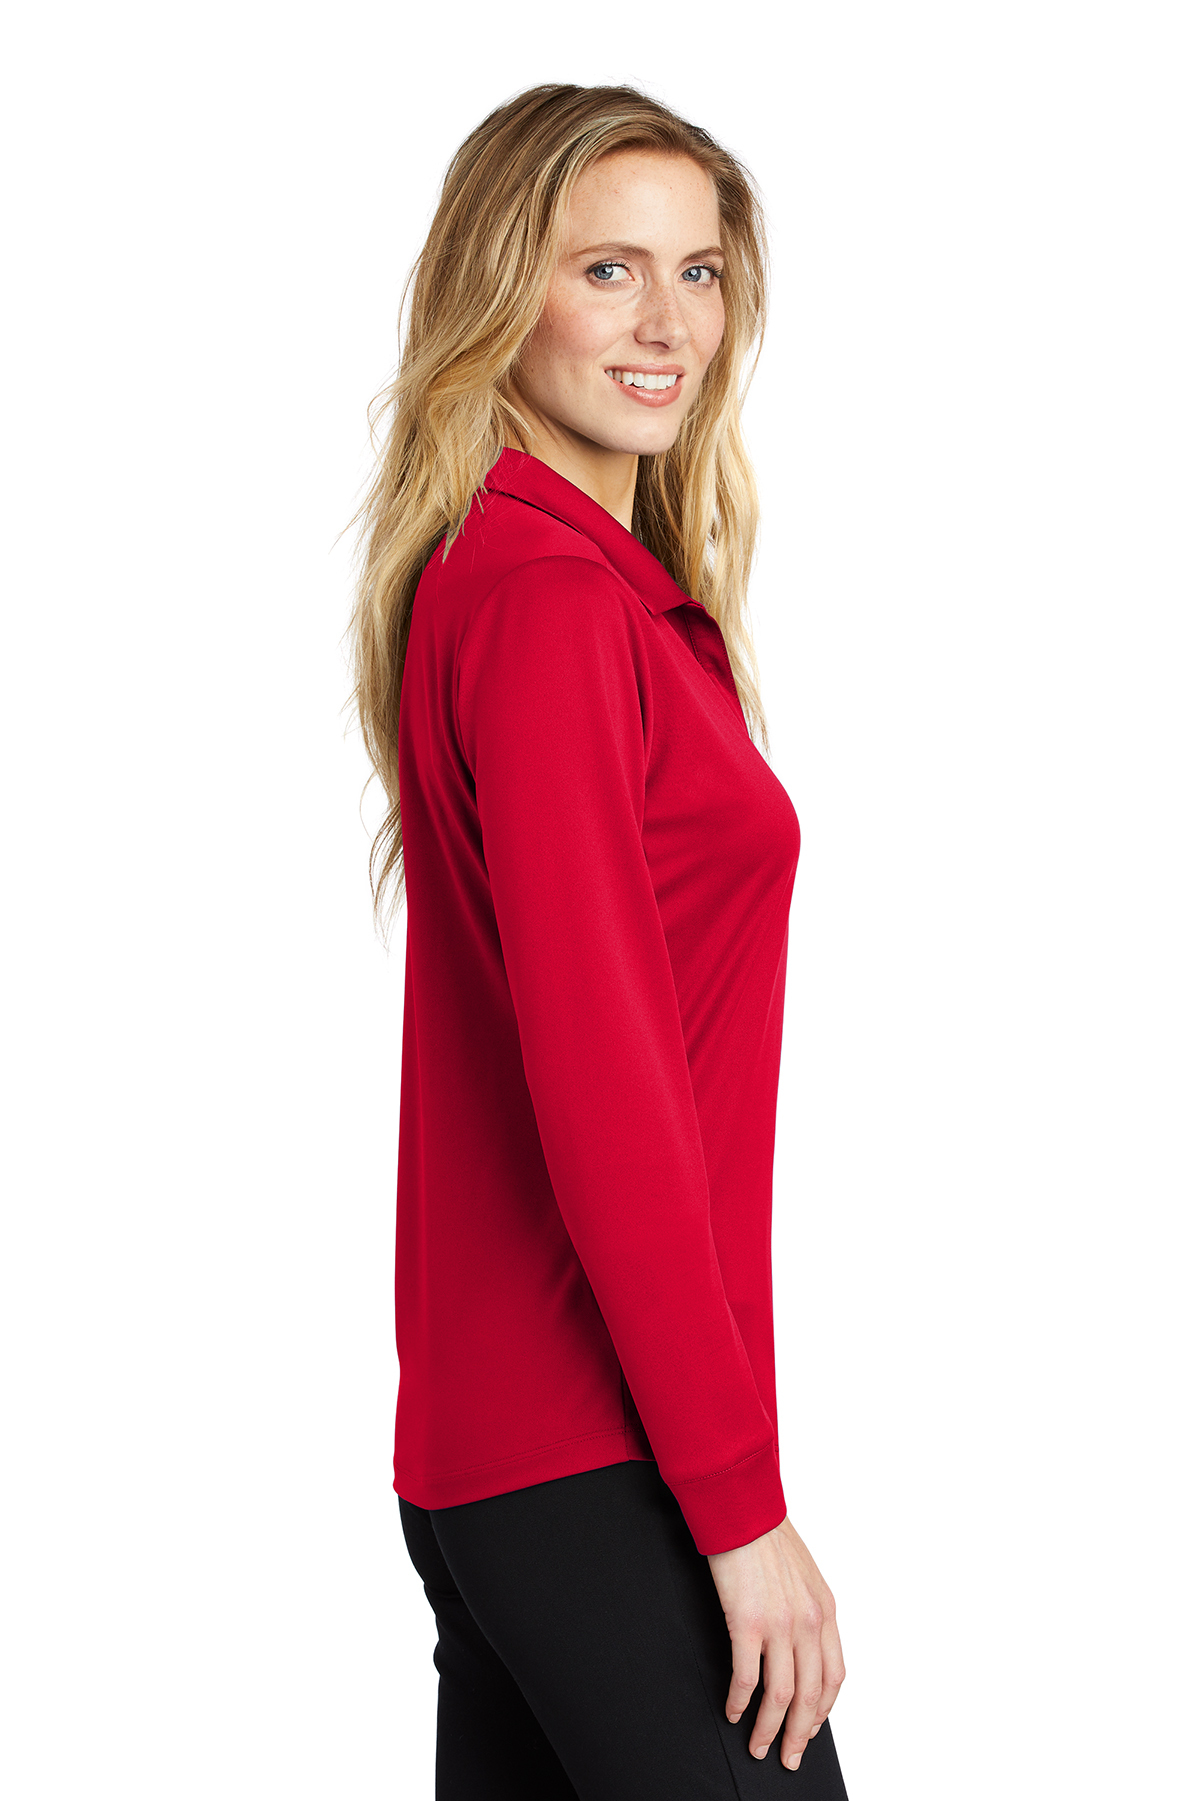 Silk Product Authority Authority Ladies Sleeve Touch™ | Port Port Polo | Long Performance